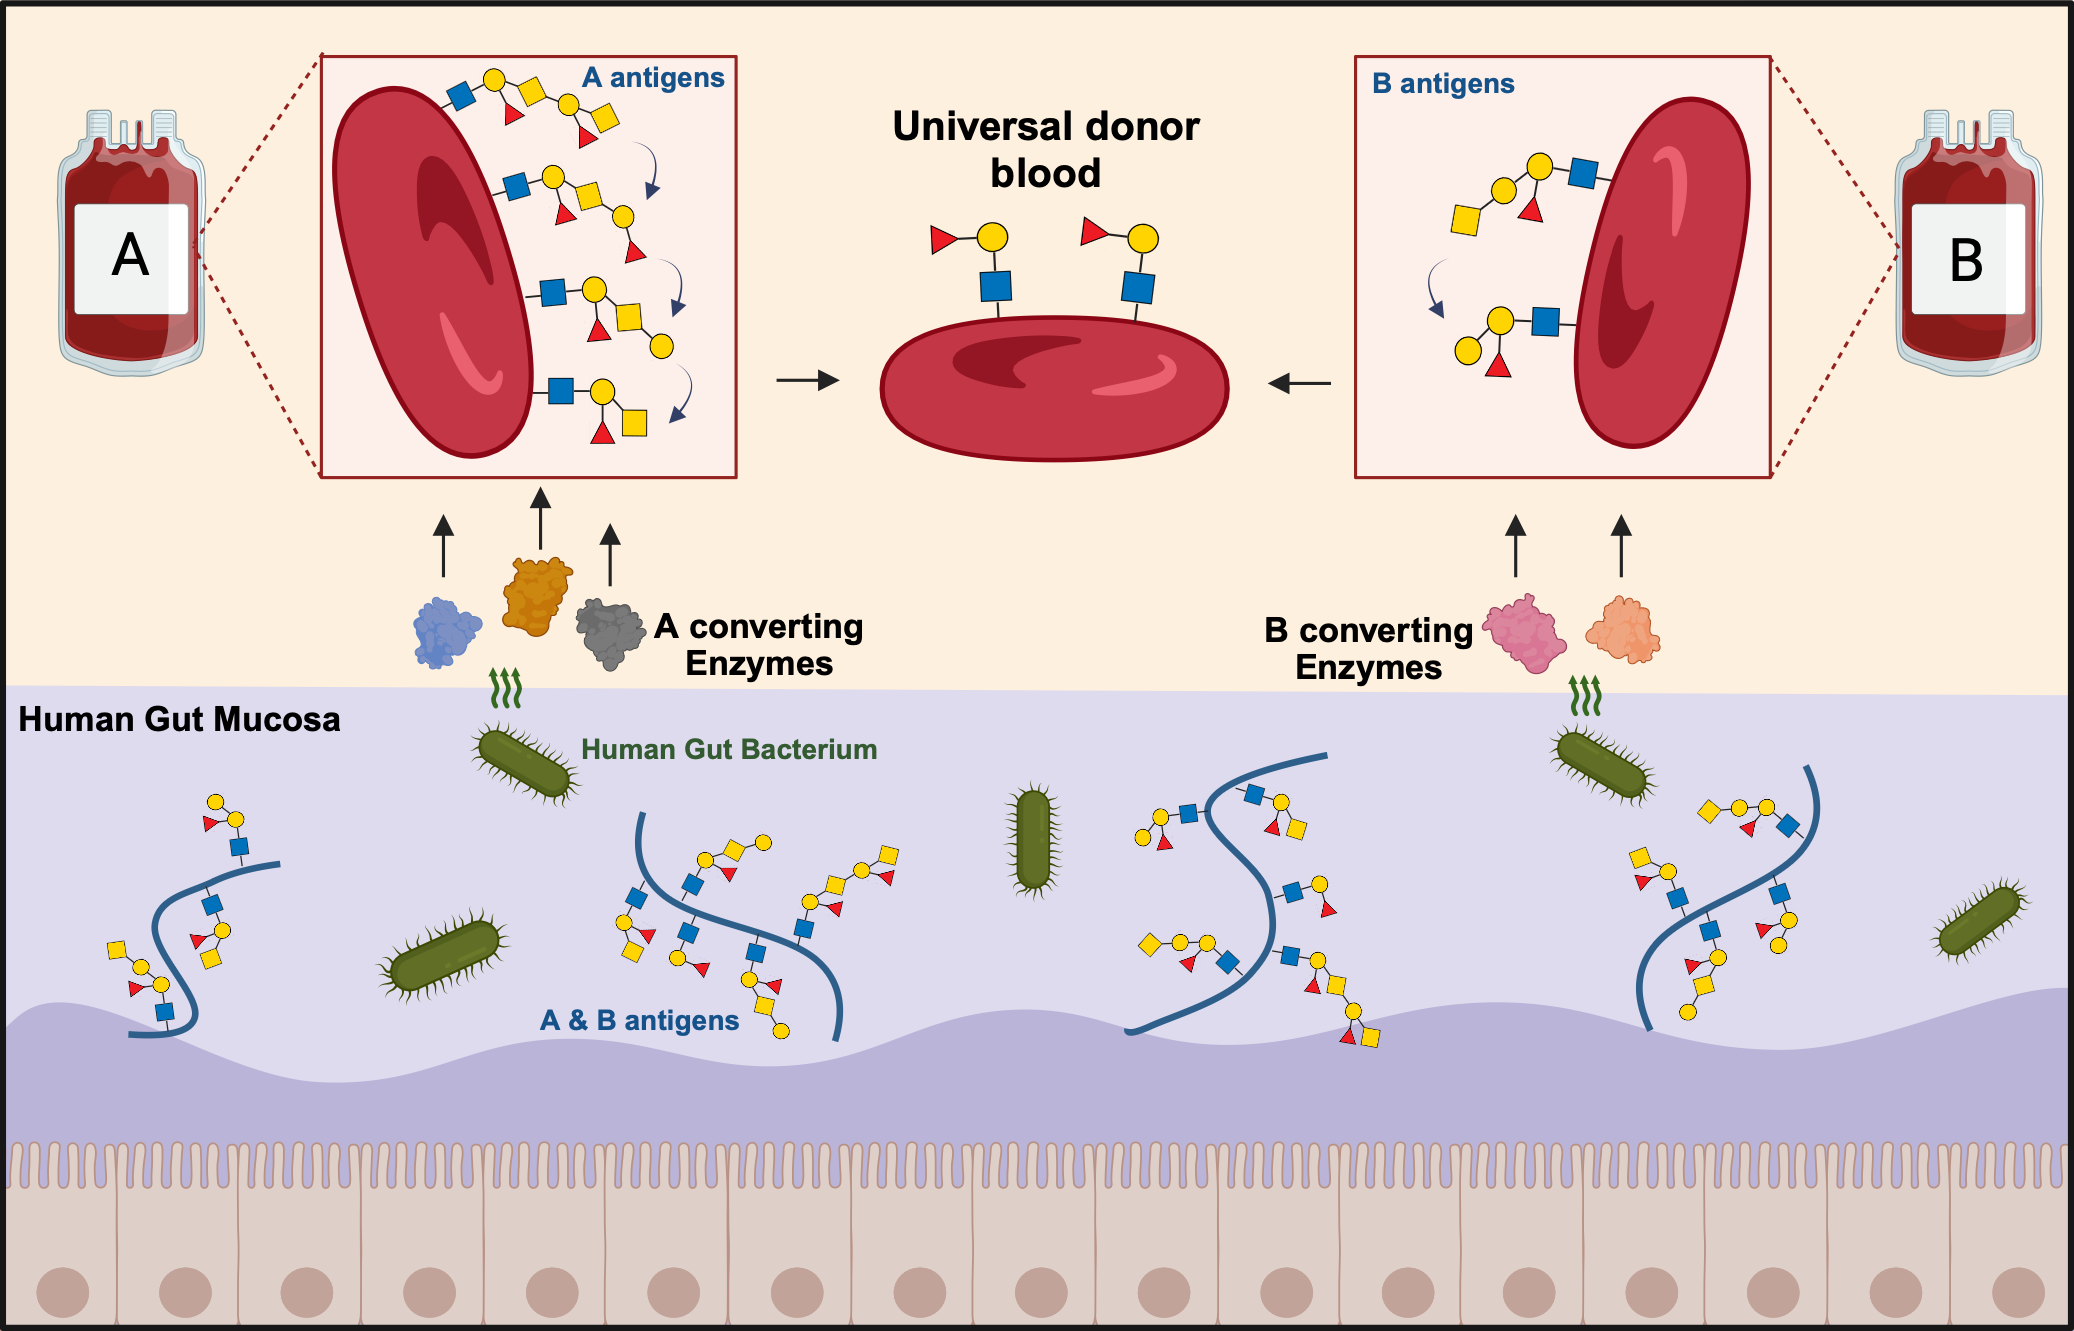 schematic showing the process of using bacterial enzymes from the human gut to remove A and B antigens from blood cells in order to create universal donor blood